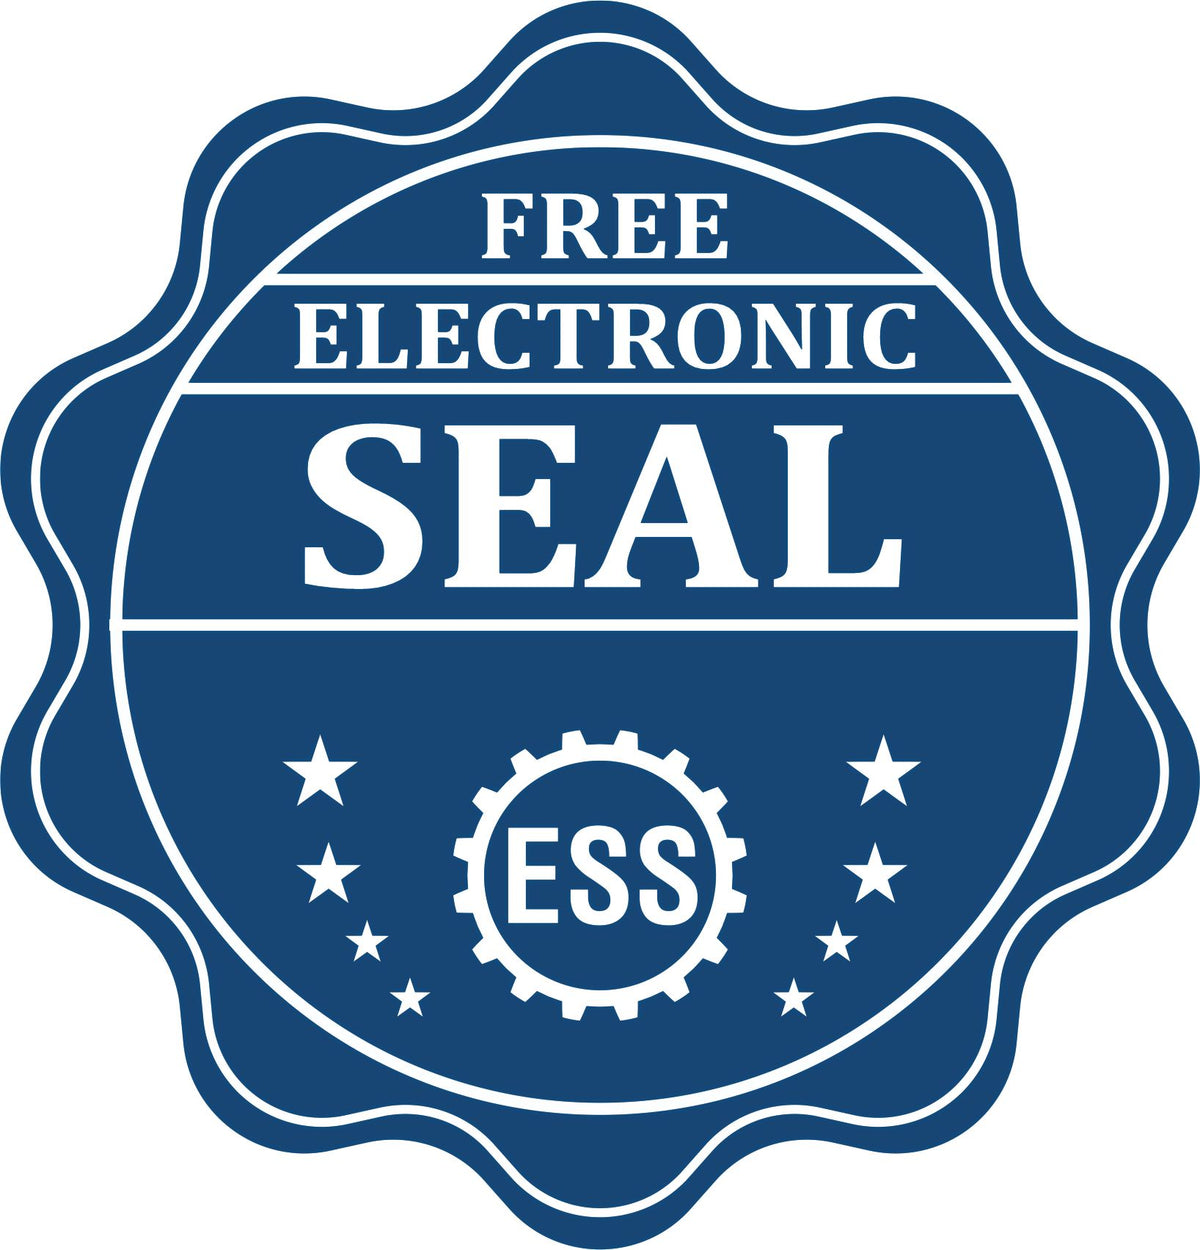 A badge showing a free electronic seal for the State of Florida Long Reach Architectural Embossing Seal with stars and the ESS gear on the emblem.